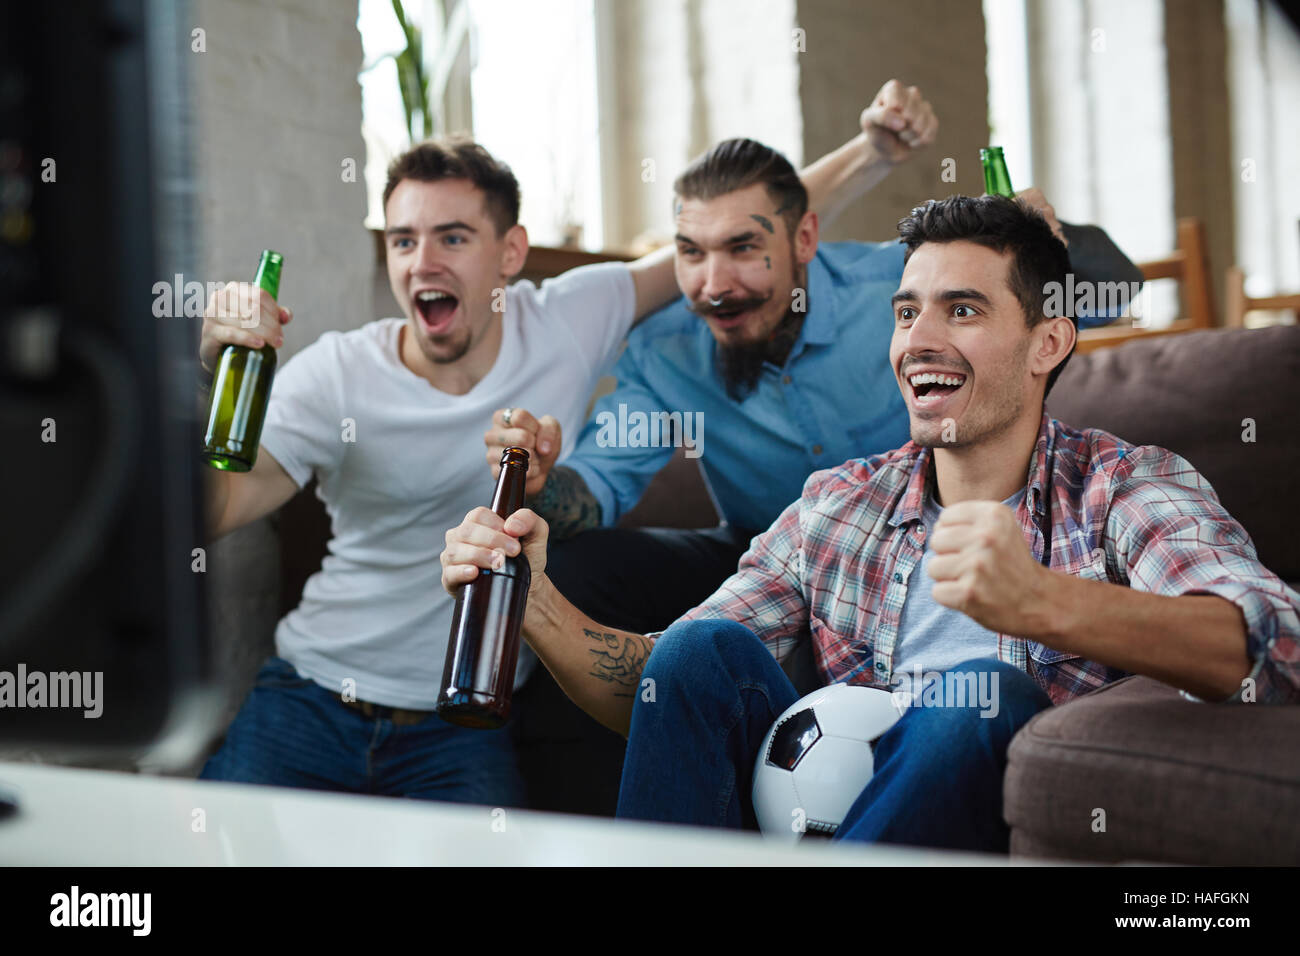 Ecstatic guys showing their gladness with triumph gesture in front of tv set Stock Photo